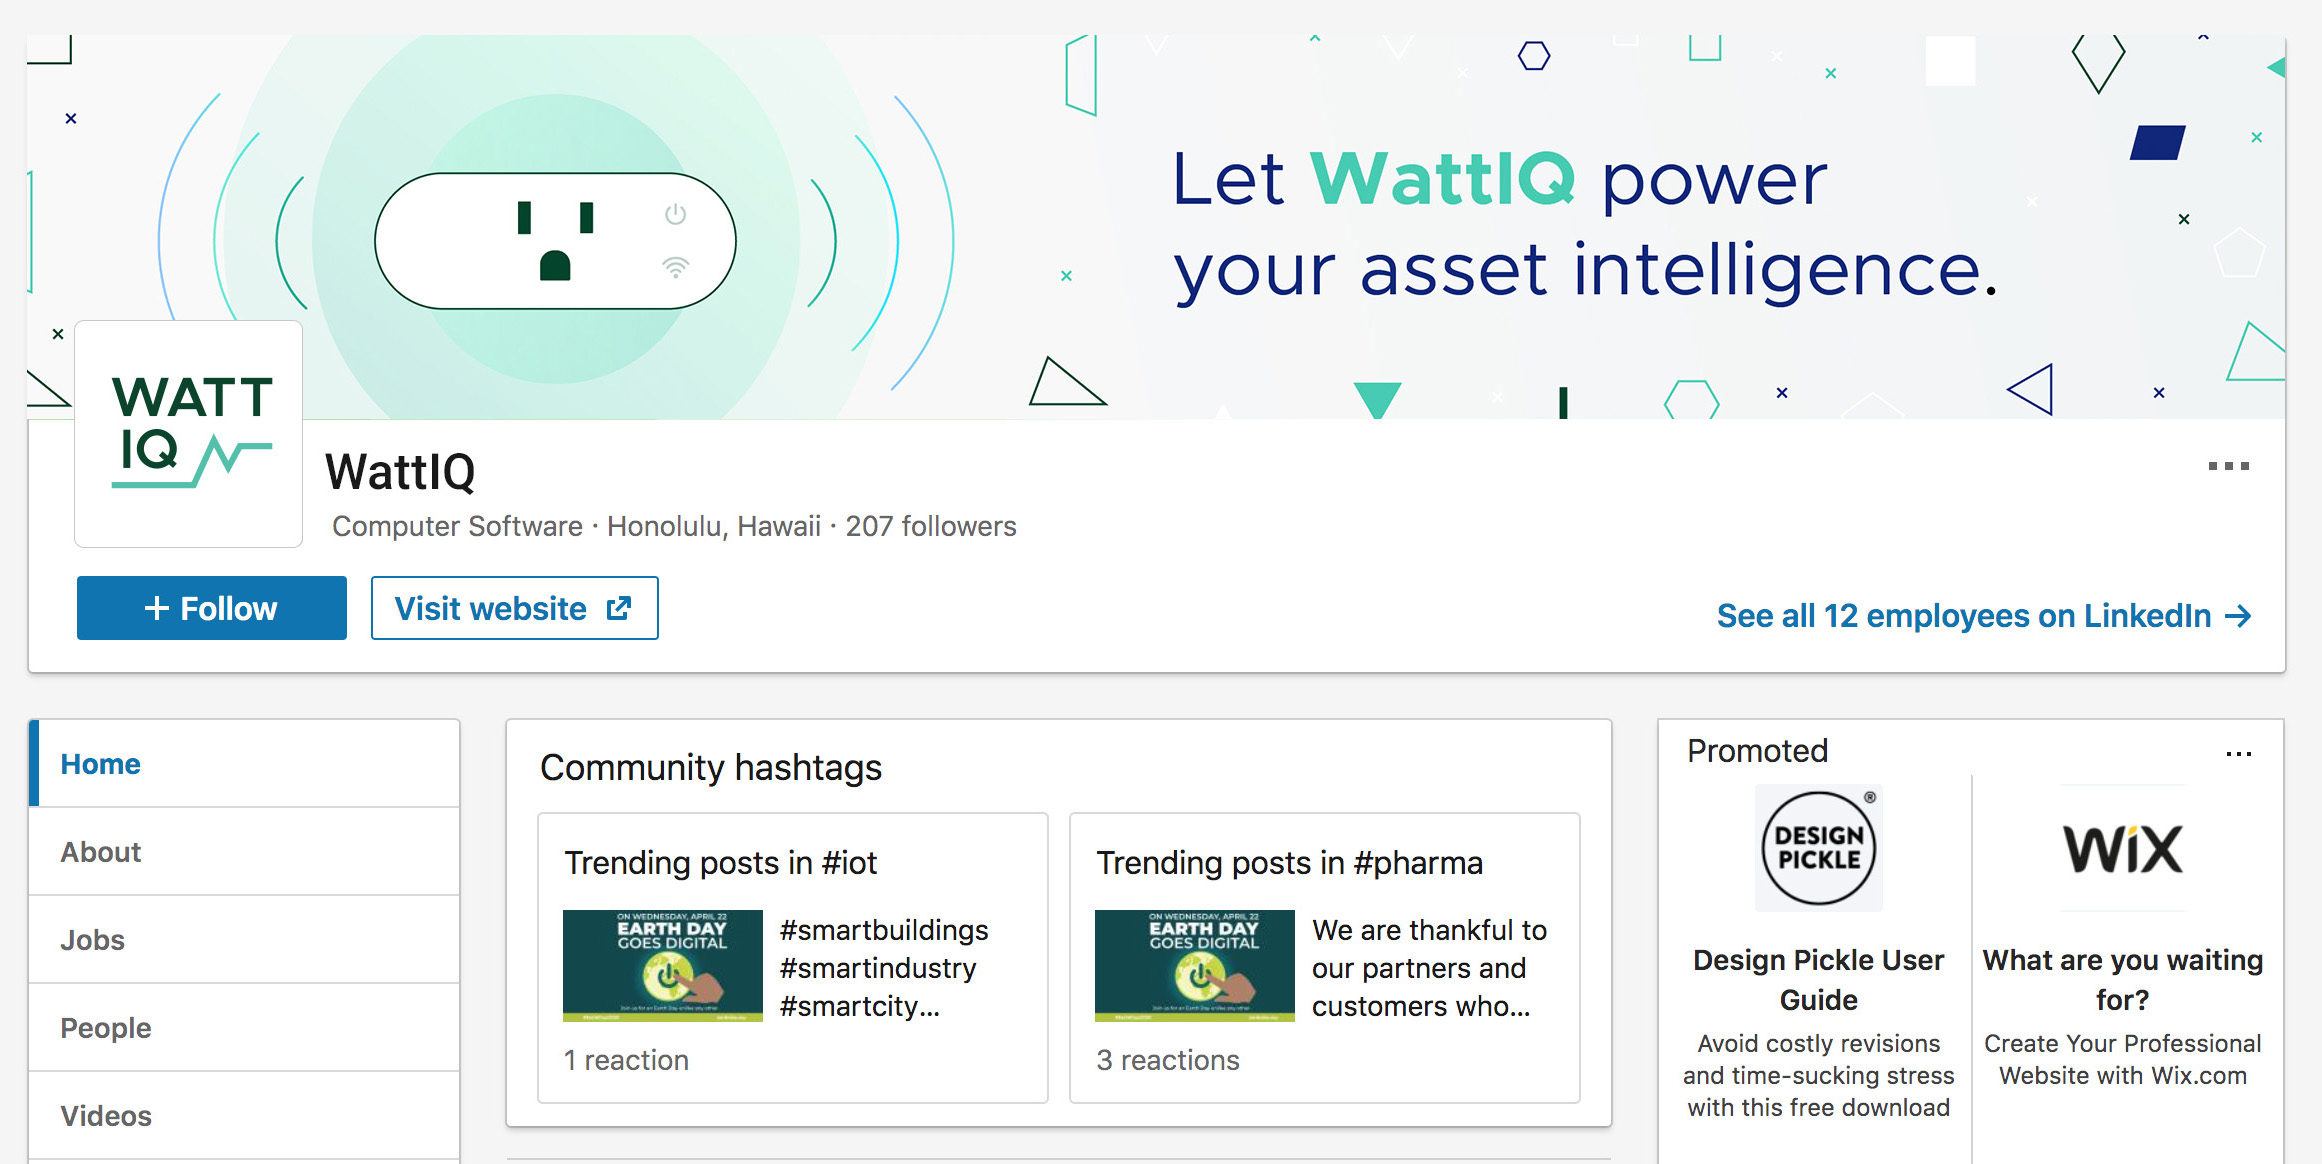 Linkedin banner design featuring shapes and the text 'Let WattIQ power you asset intelligence'.